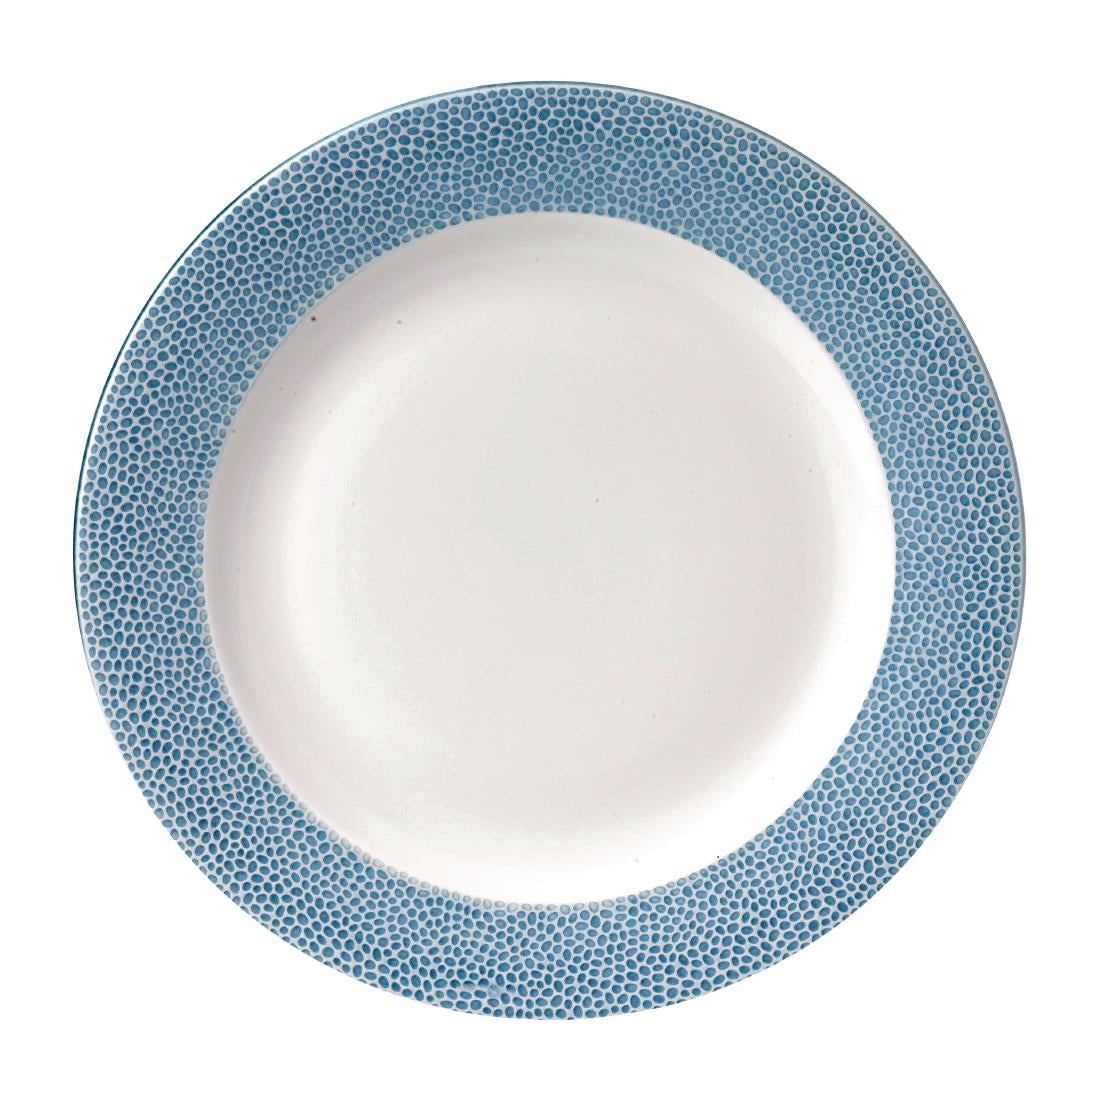 FD837 Churchill Isla Spinwash Profile Wide Rim Plates Ocean Blue 305mm (Pack of 12) JD Catering Equipment Solutions Ltd